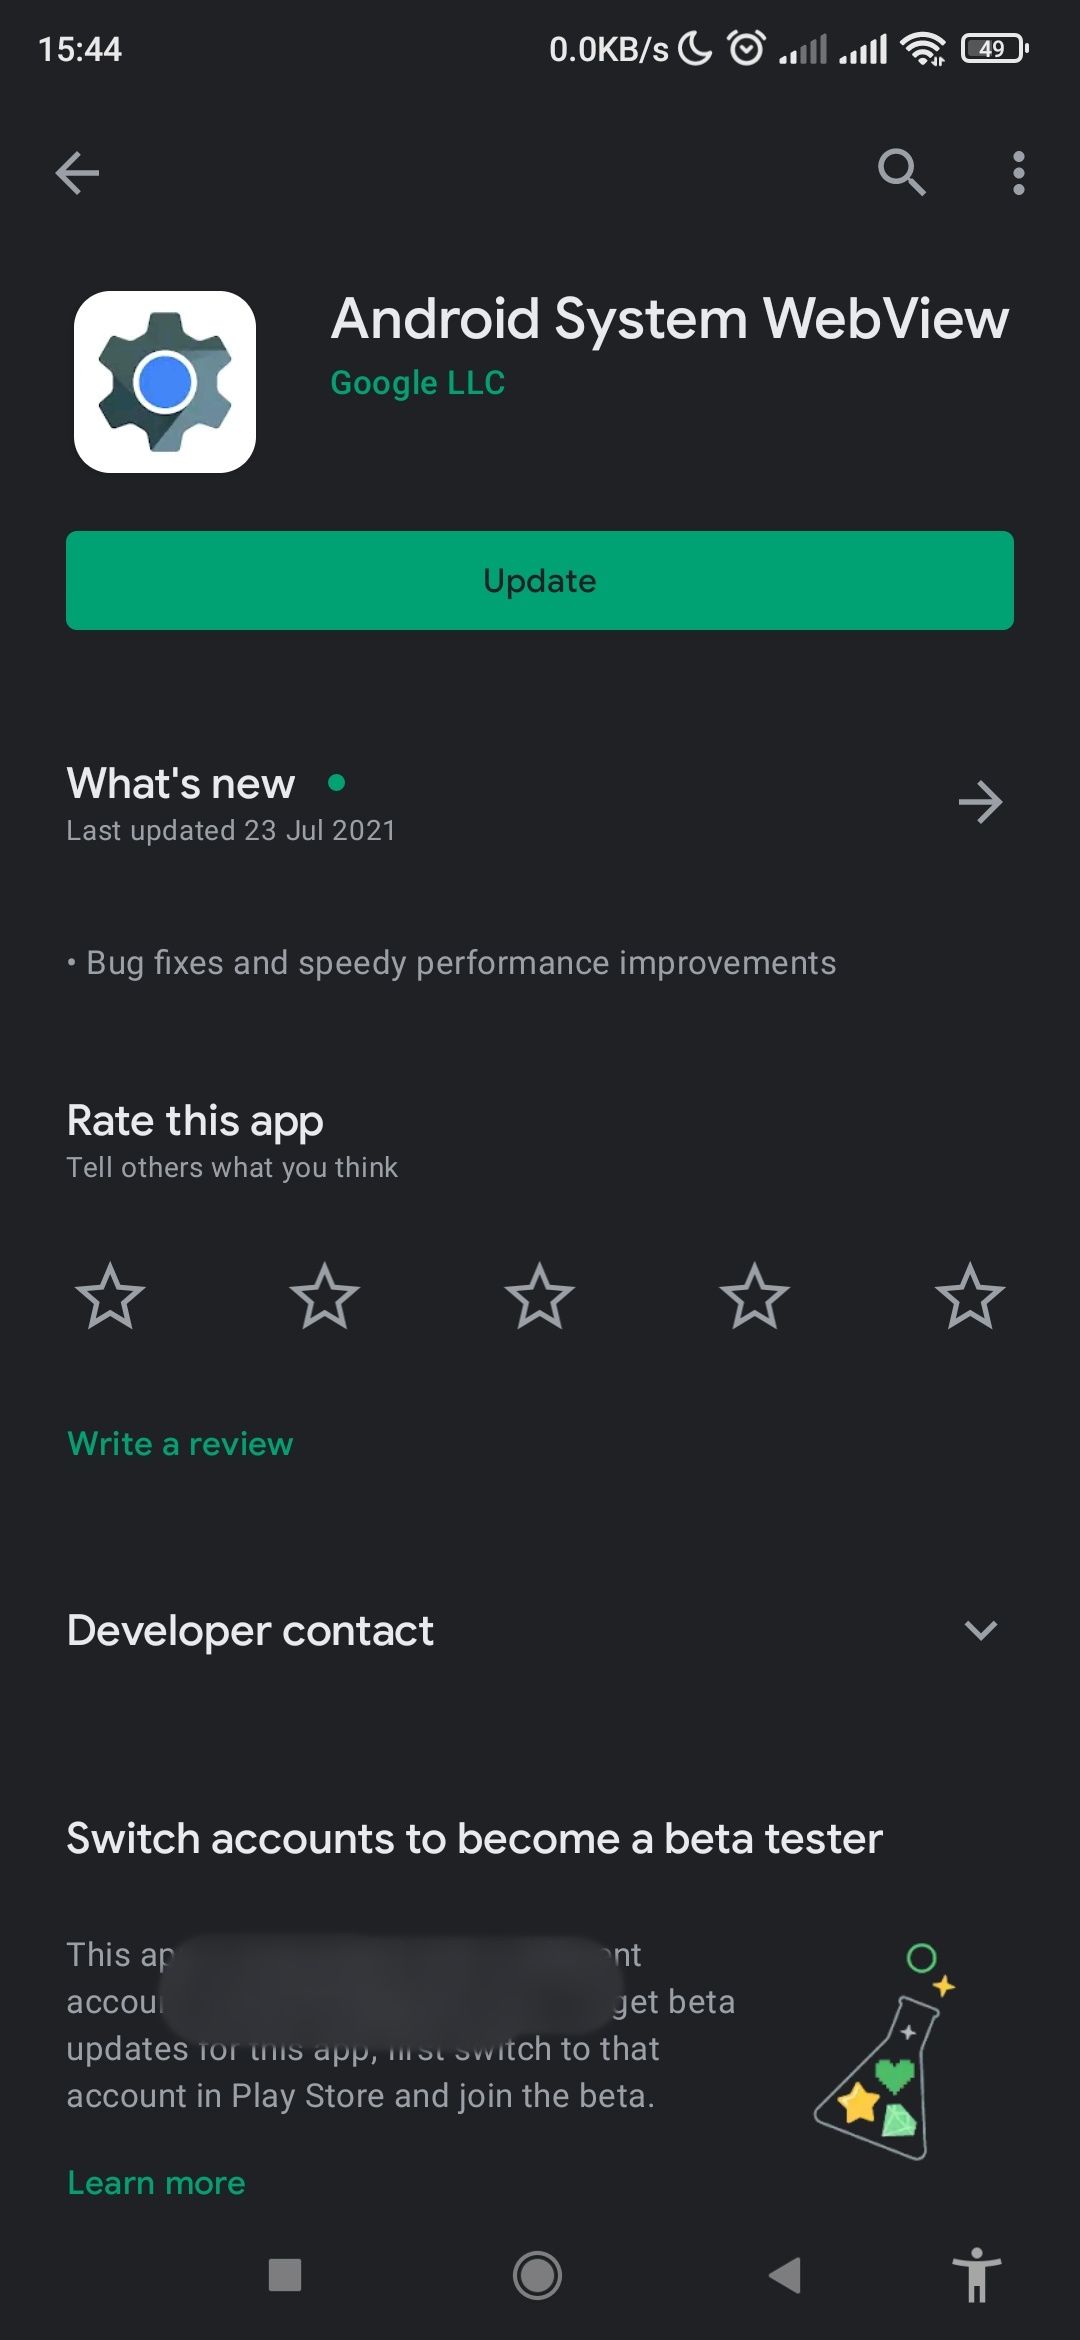 Webview update available in Google Play